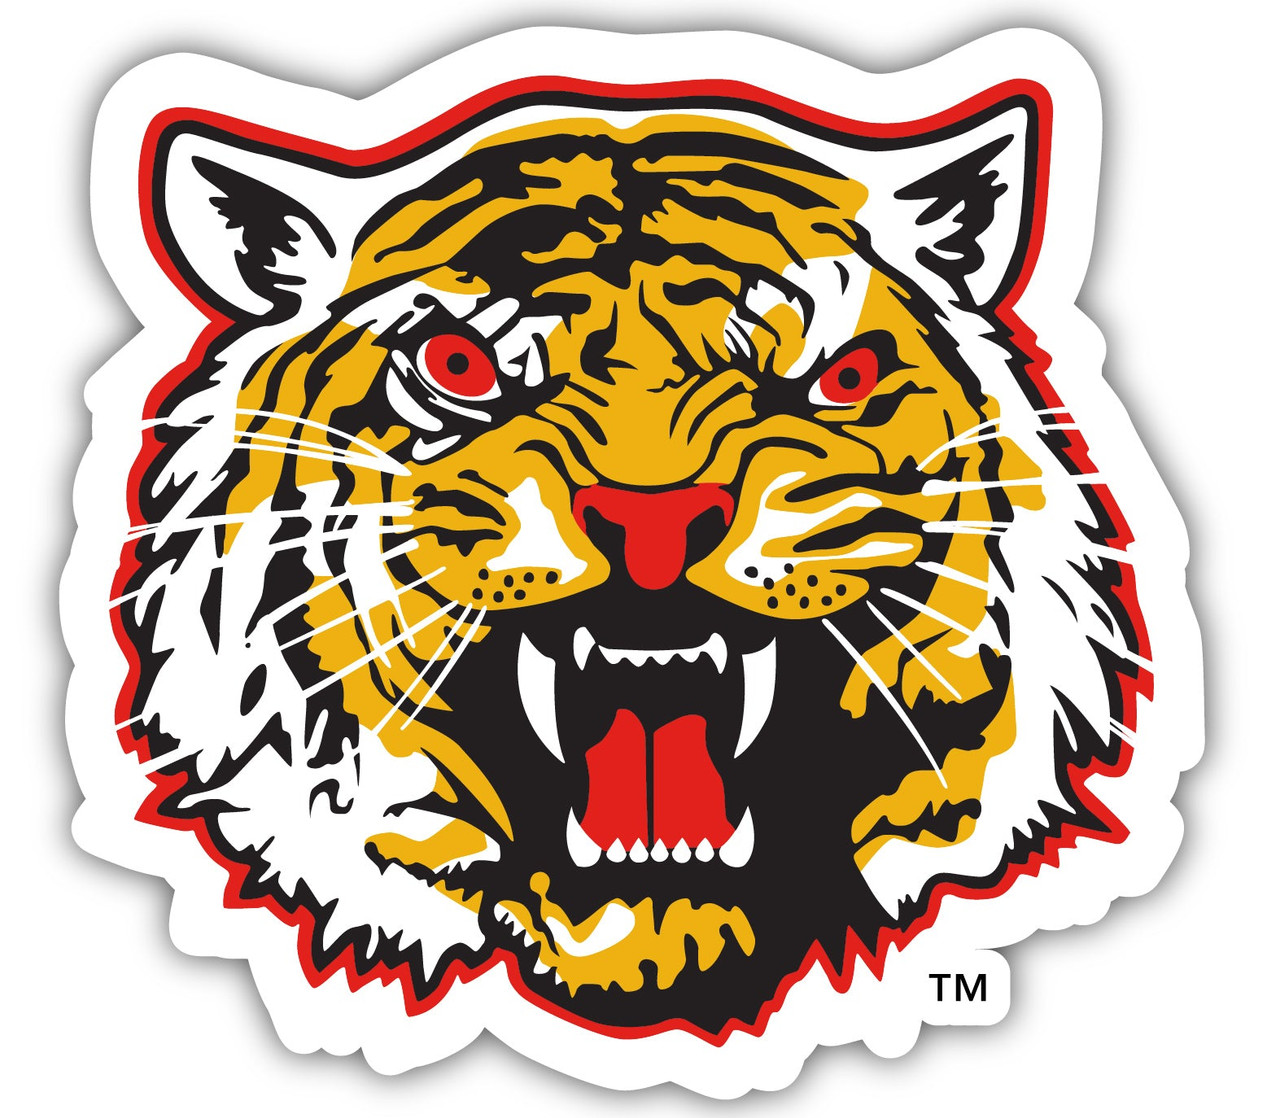 Grambling State Tigers 10 Inch Vinyl Decal Sticker